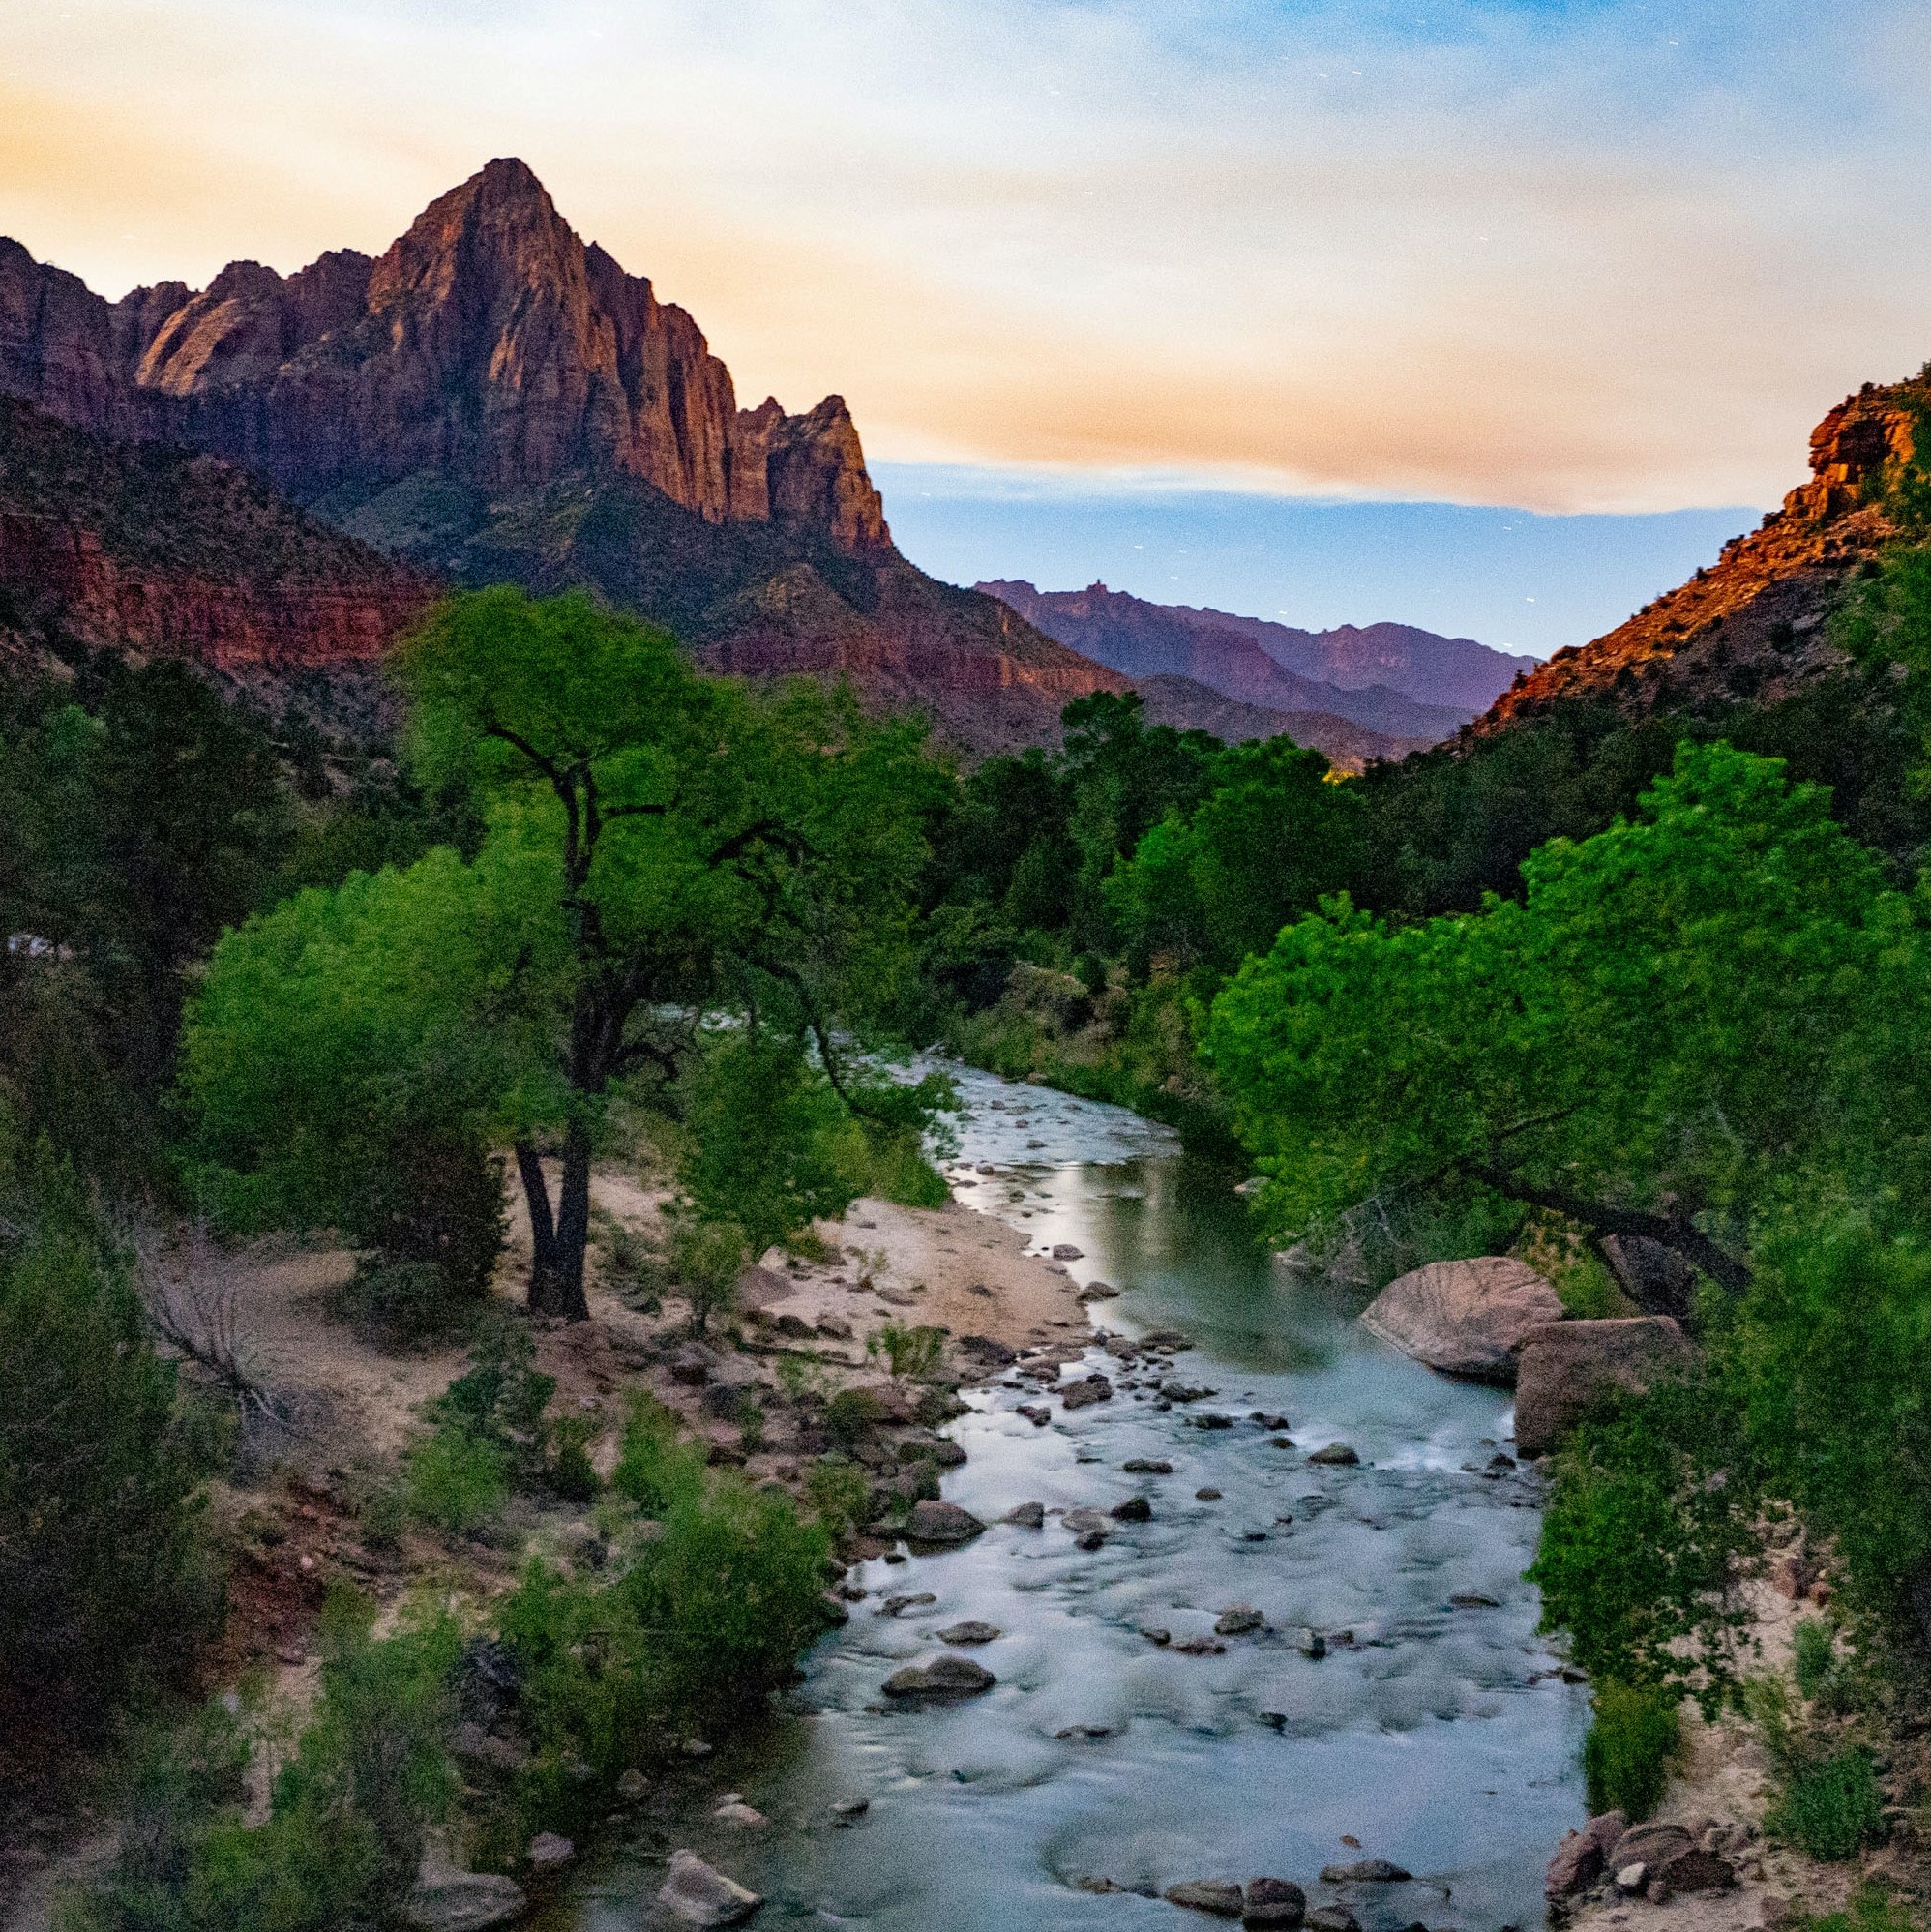 A stream with mountains in the background in Zion National Park